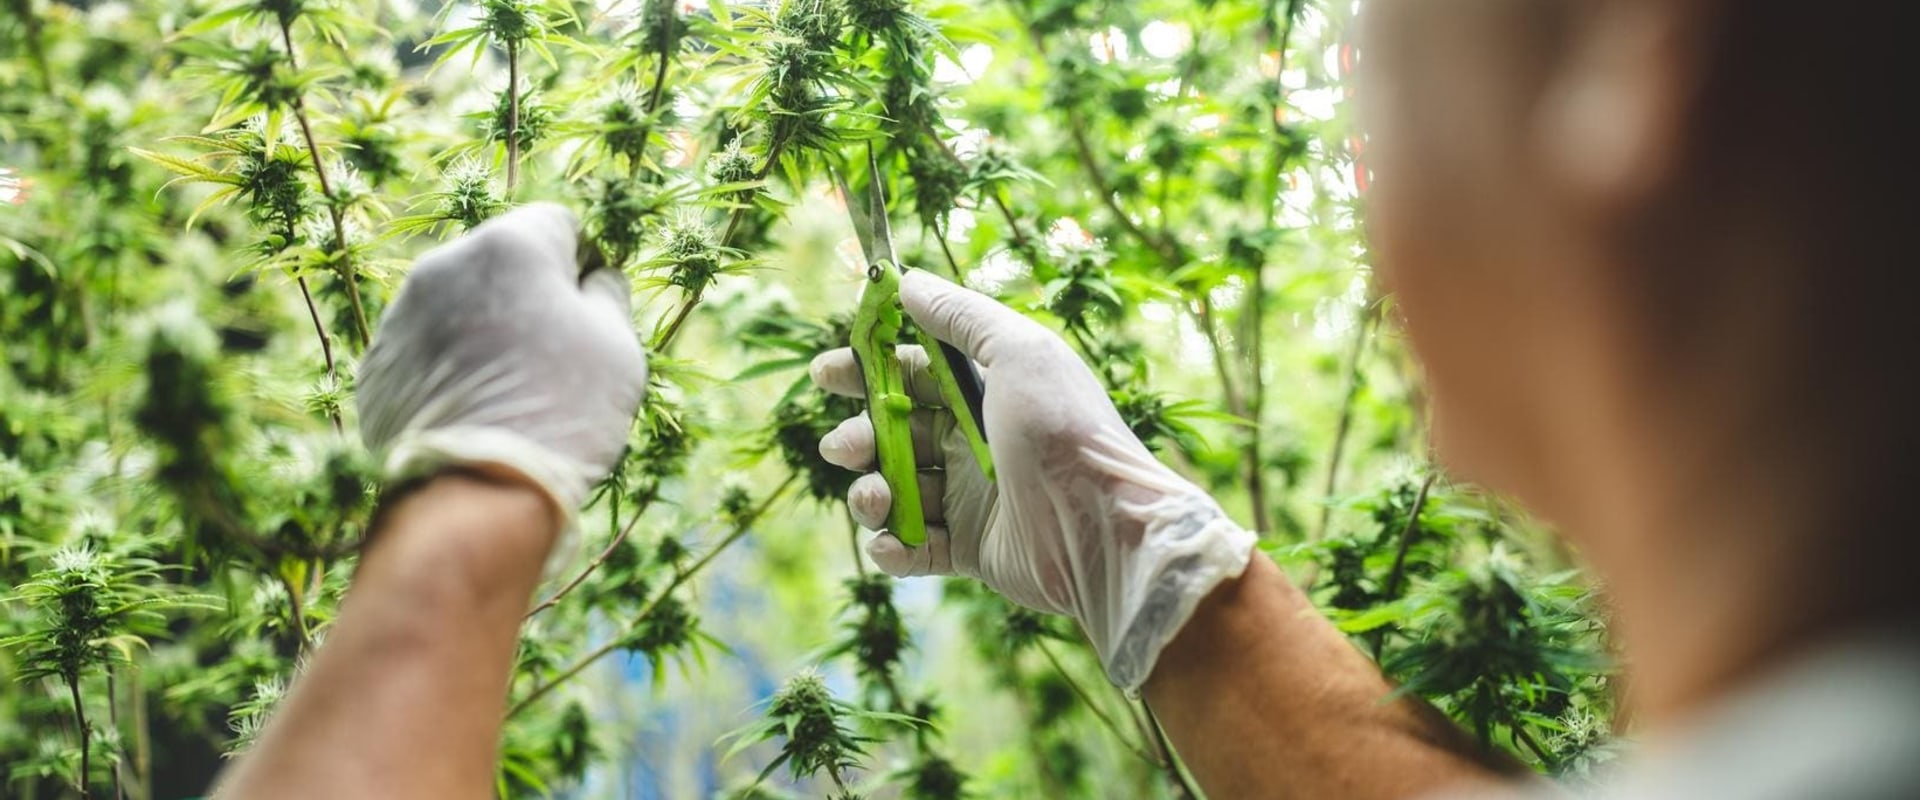 Understanding Consumer Preferences in the Cannabis Industry